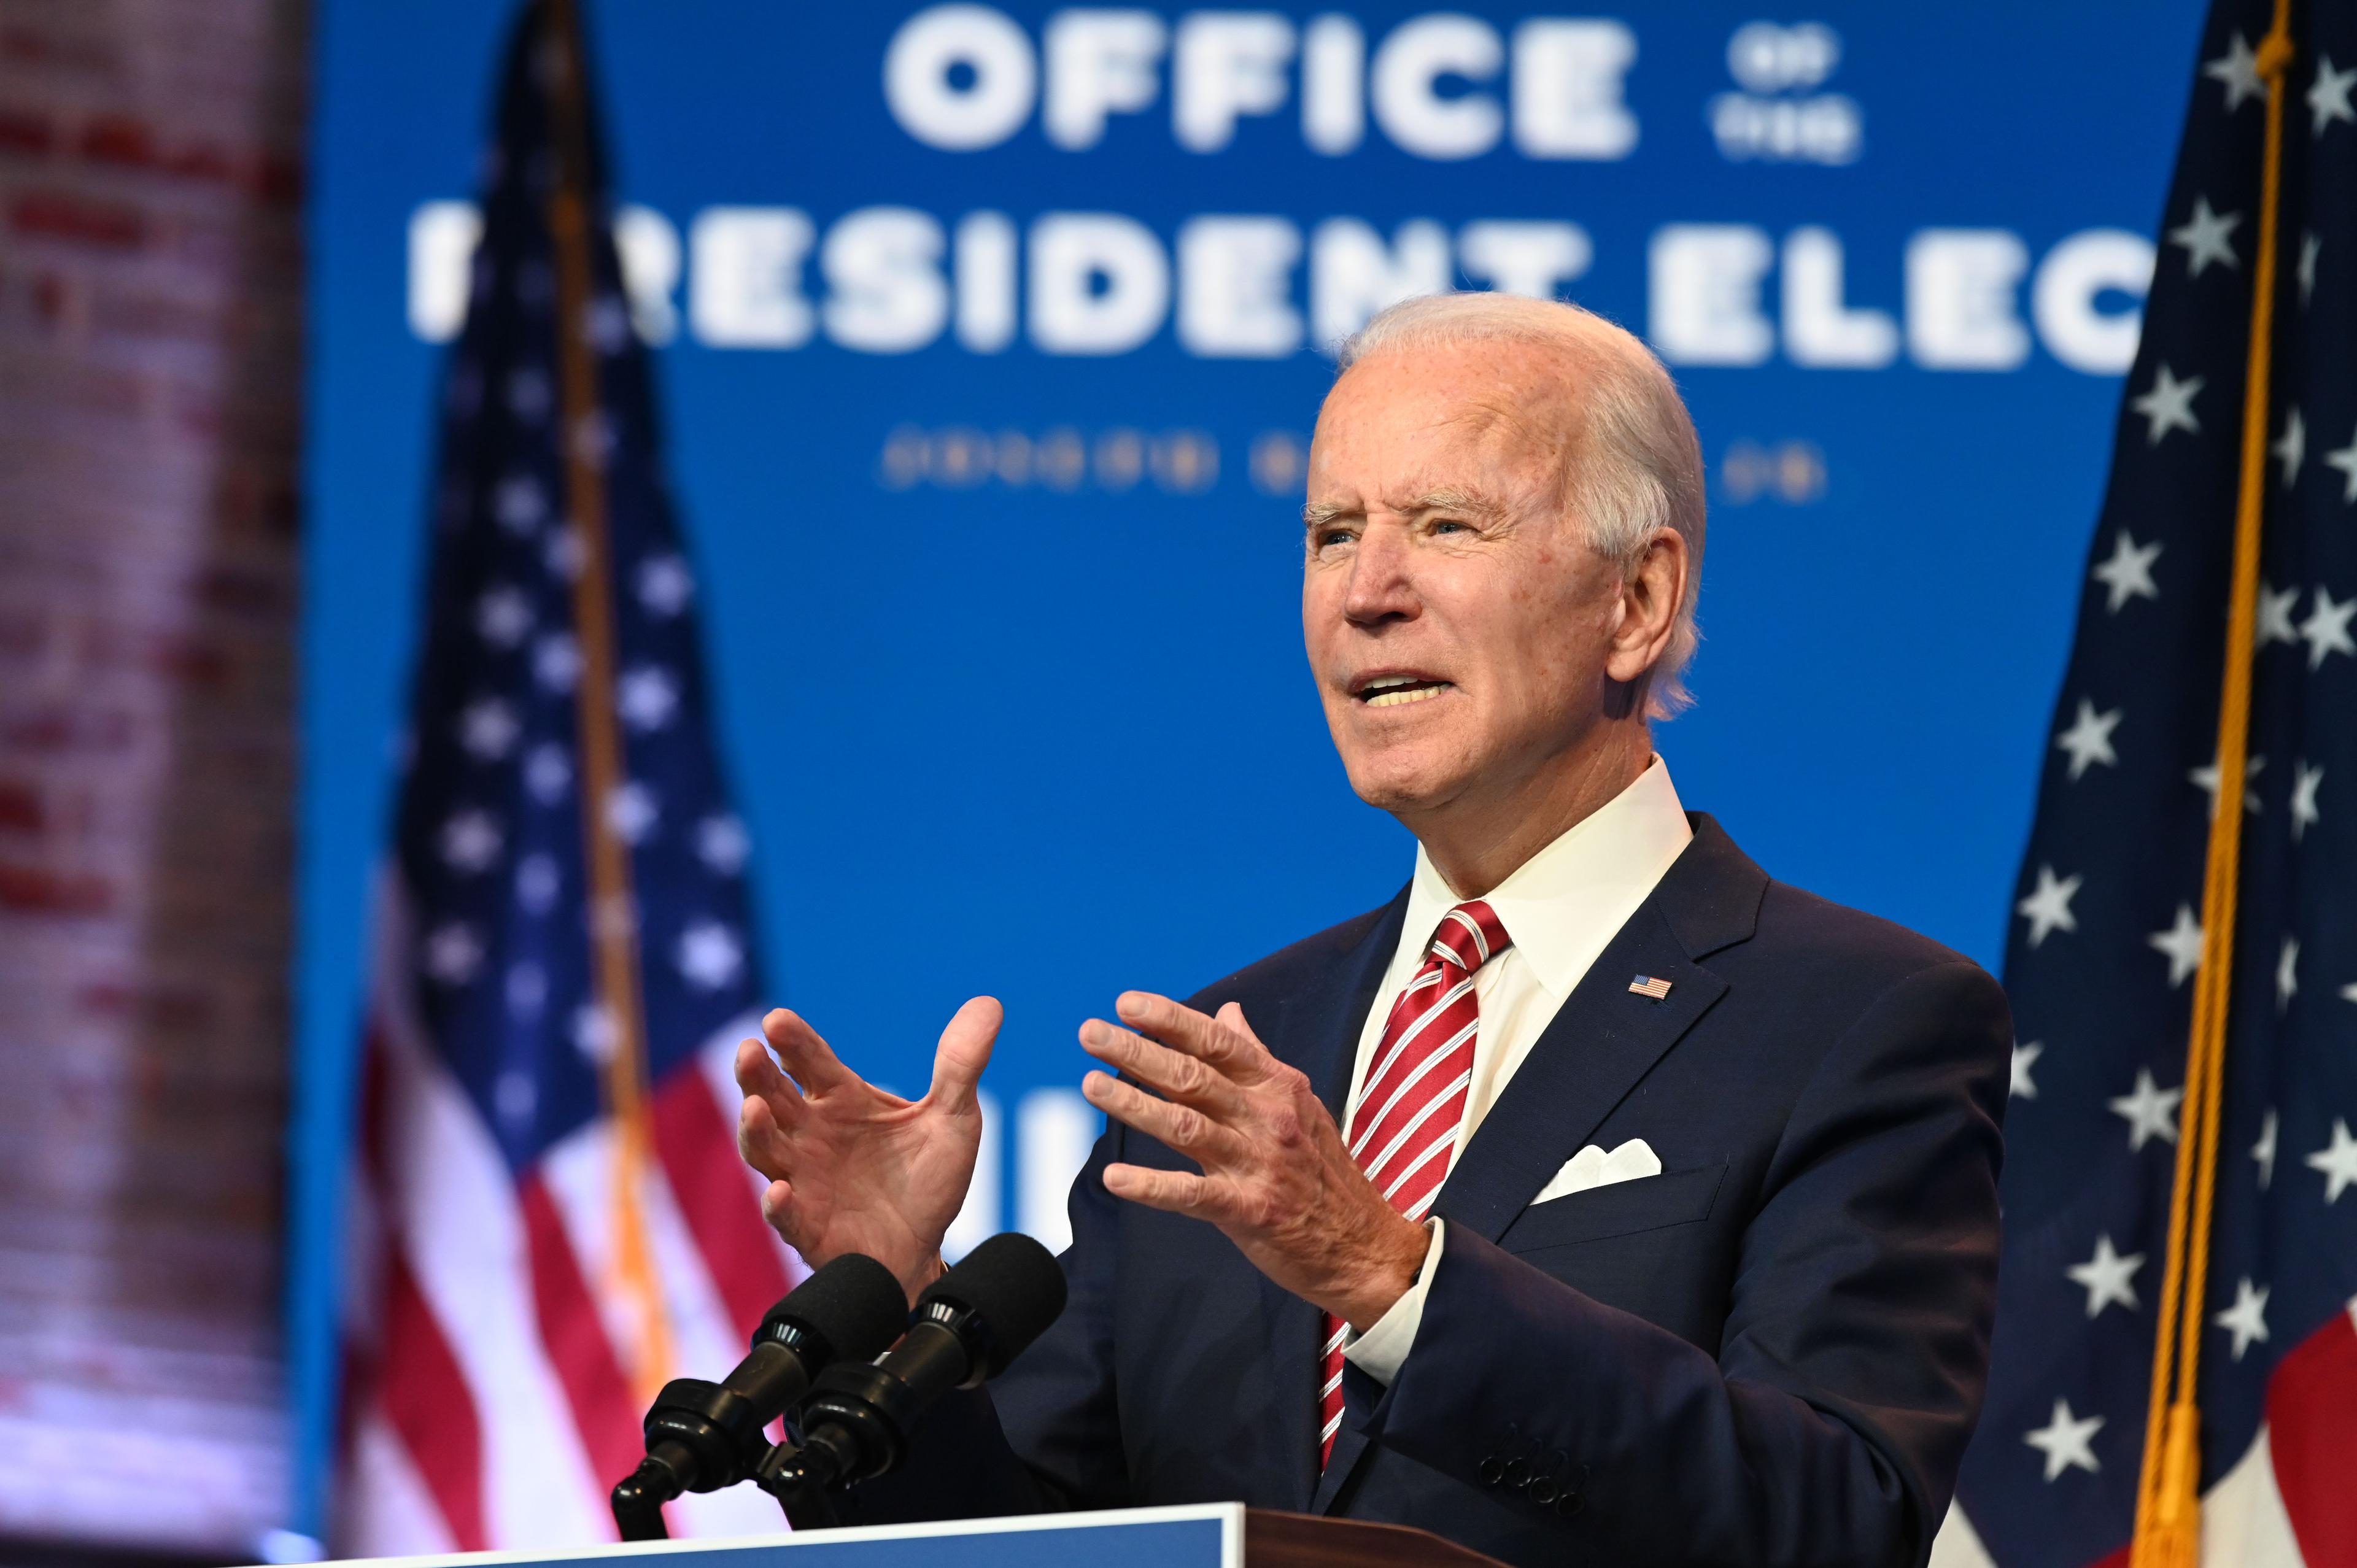 Biden: Commit to difficult but necessary steps - Avaz